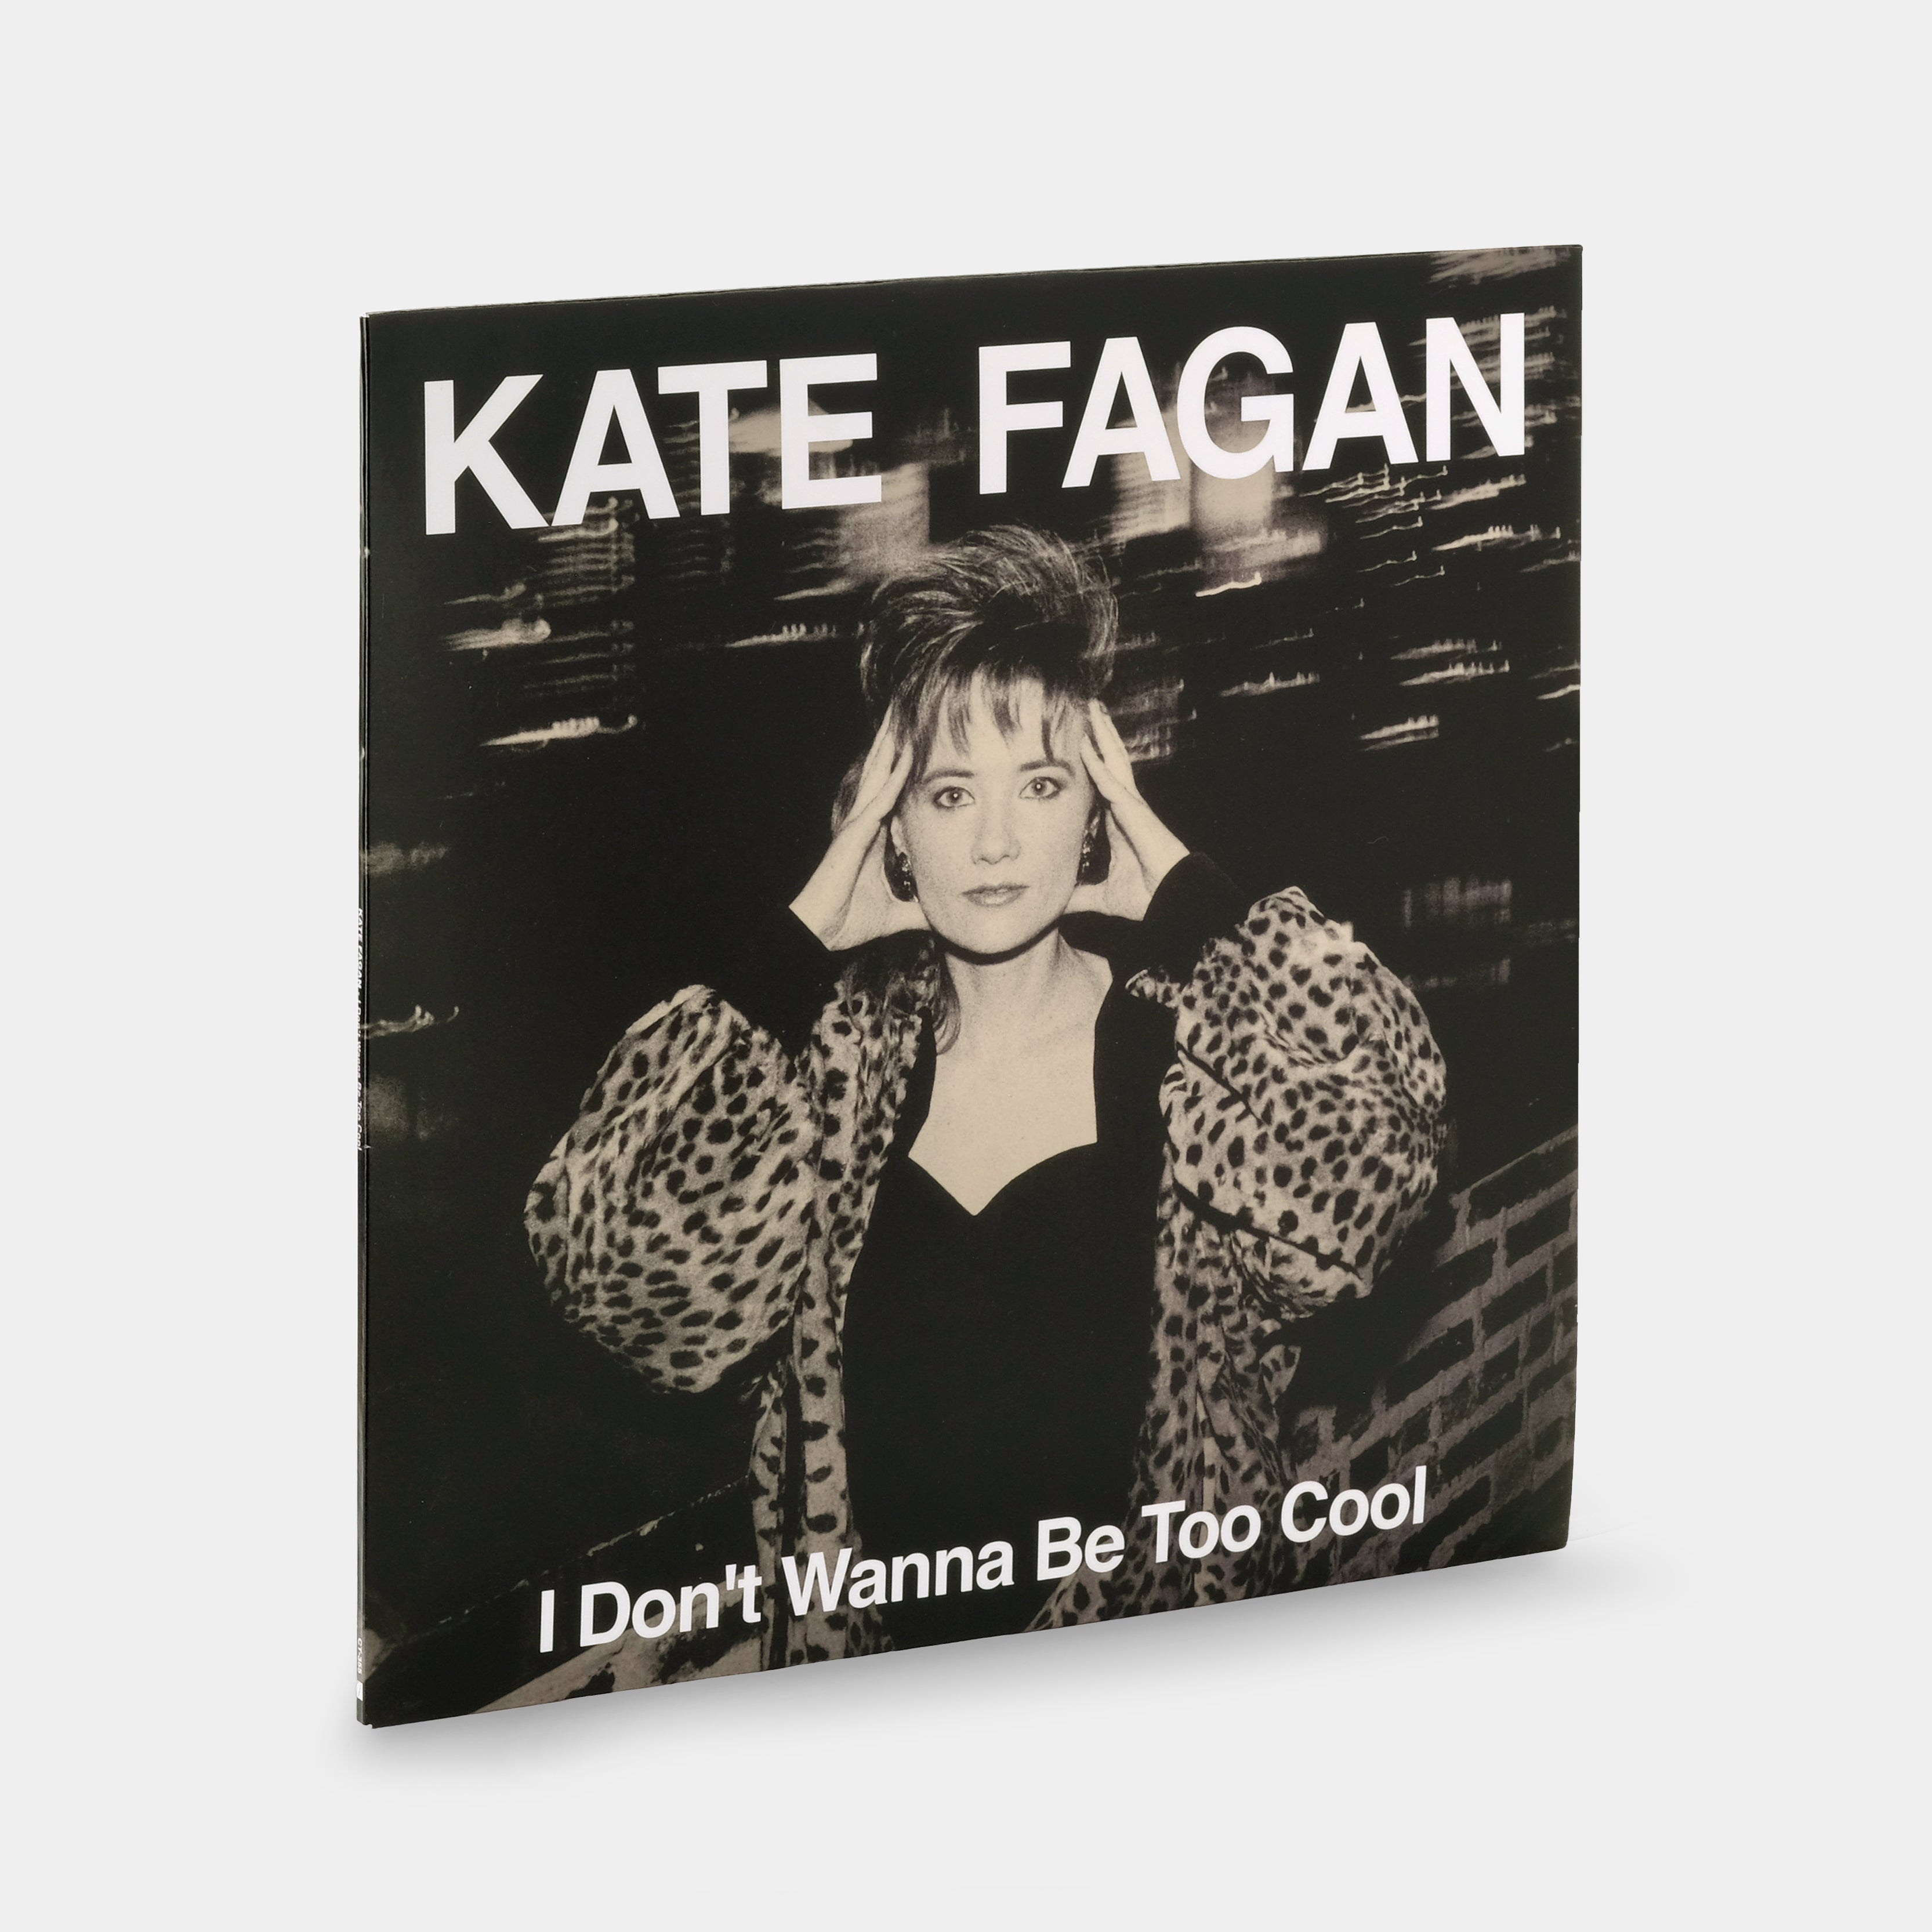 Kate Fagan - I Don't Wanna Be Too Cool (Expanded Edition) LP Milky Clear Vinyl Record